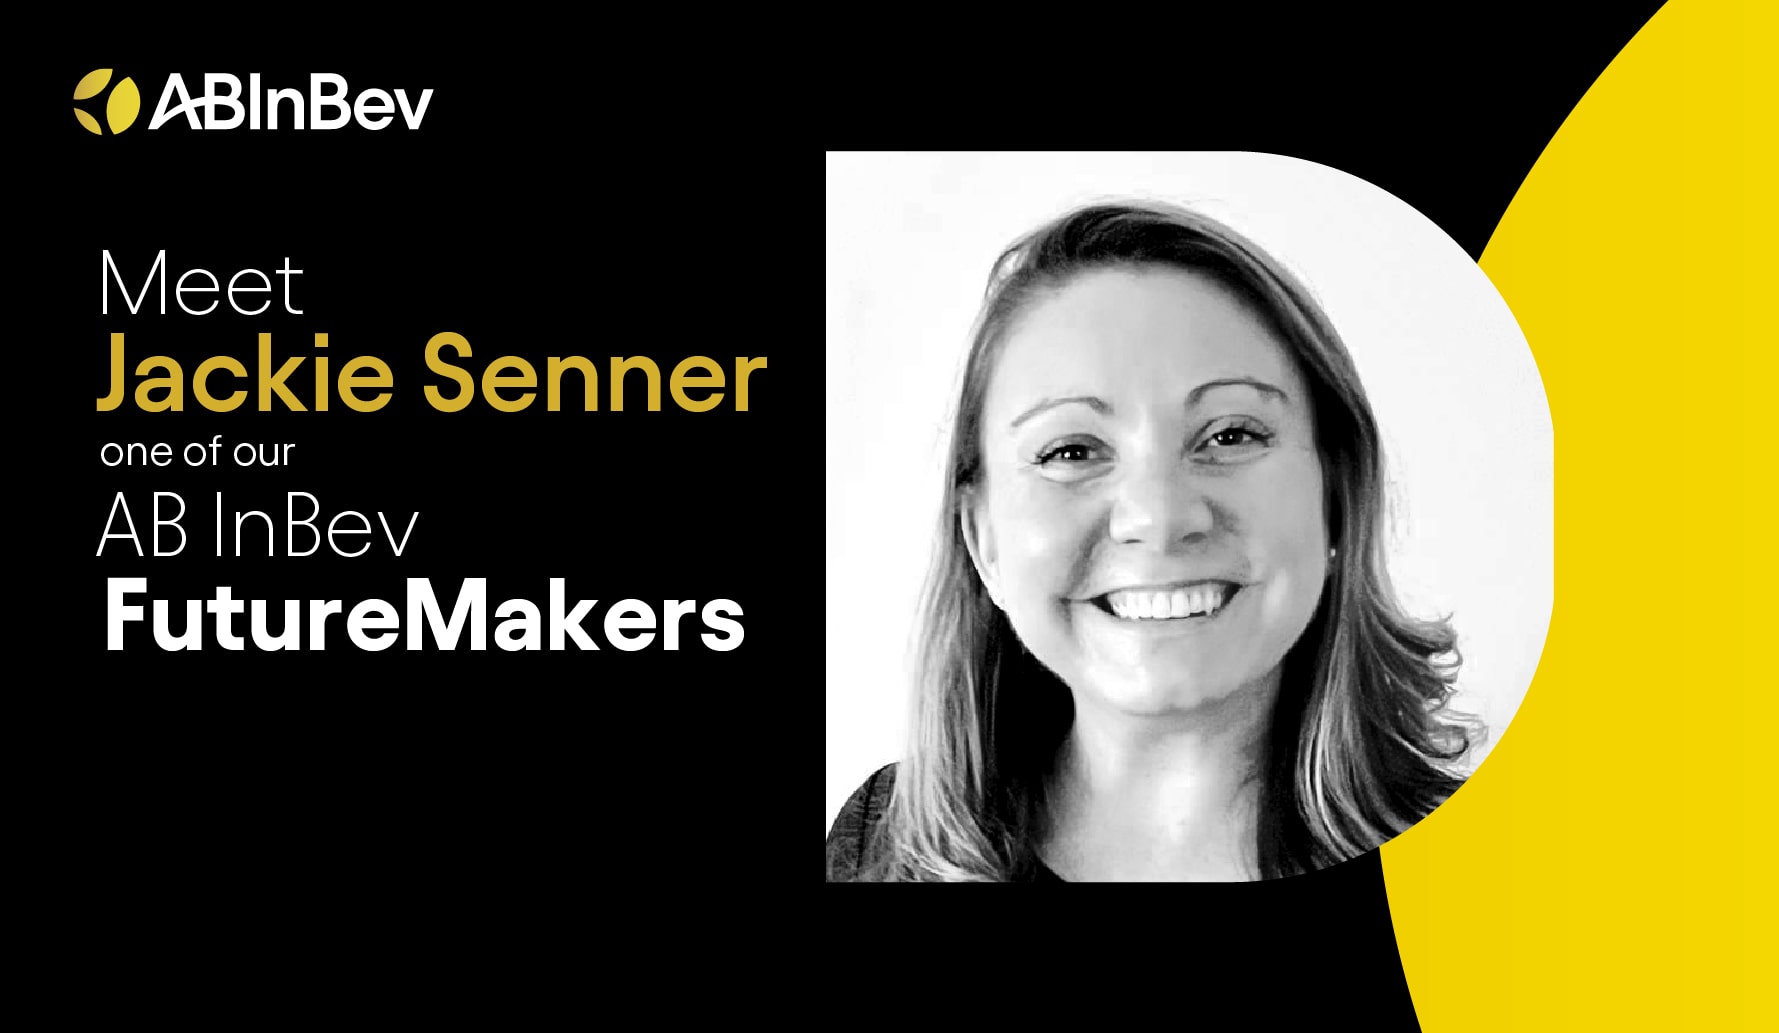 Meet AB InBev FutureMaker Jackie Senner: “A future with more cheers is one that everyone can celebrate and everyone can share.”